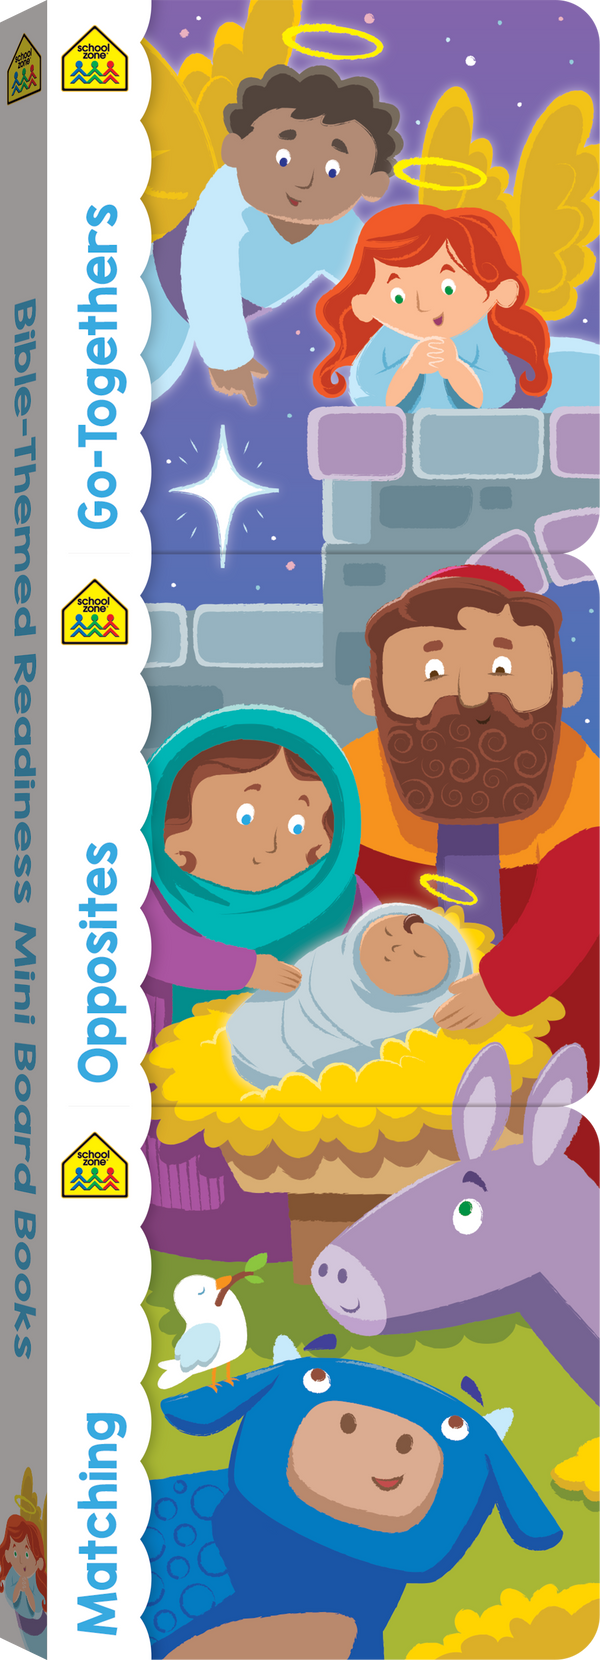 This trio of Go-Togethers, Opposites, and Matching Bible-Themed Readiness Mini Board Books will make a great gift!